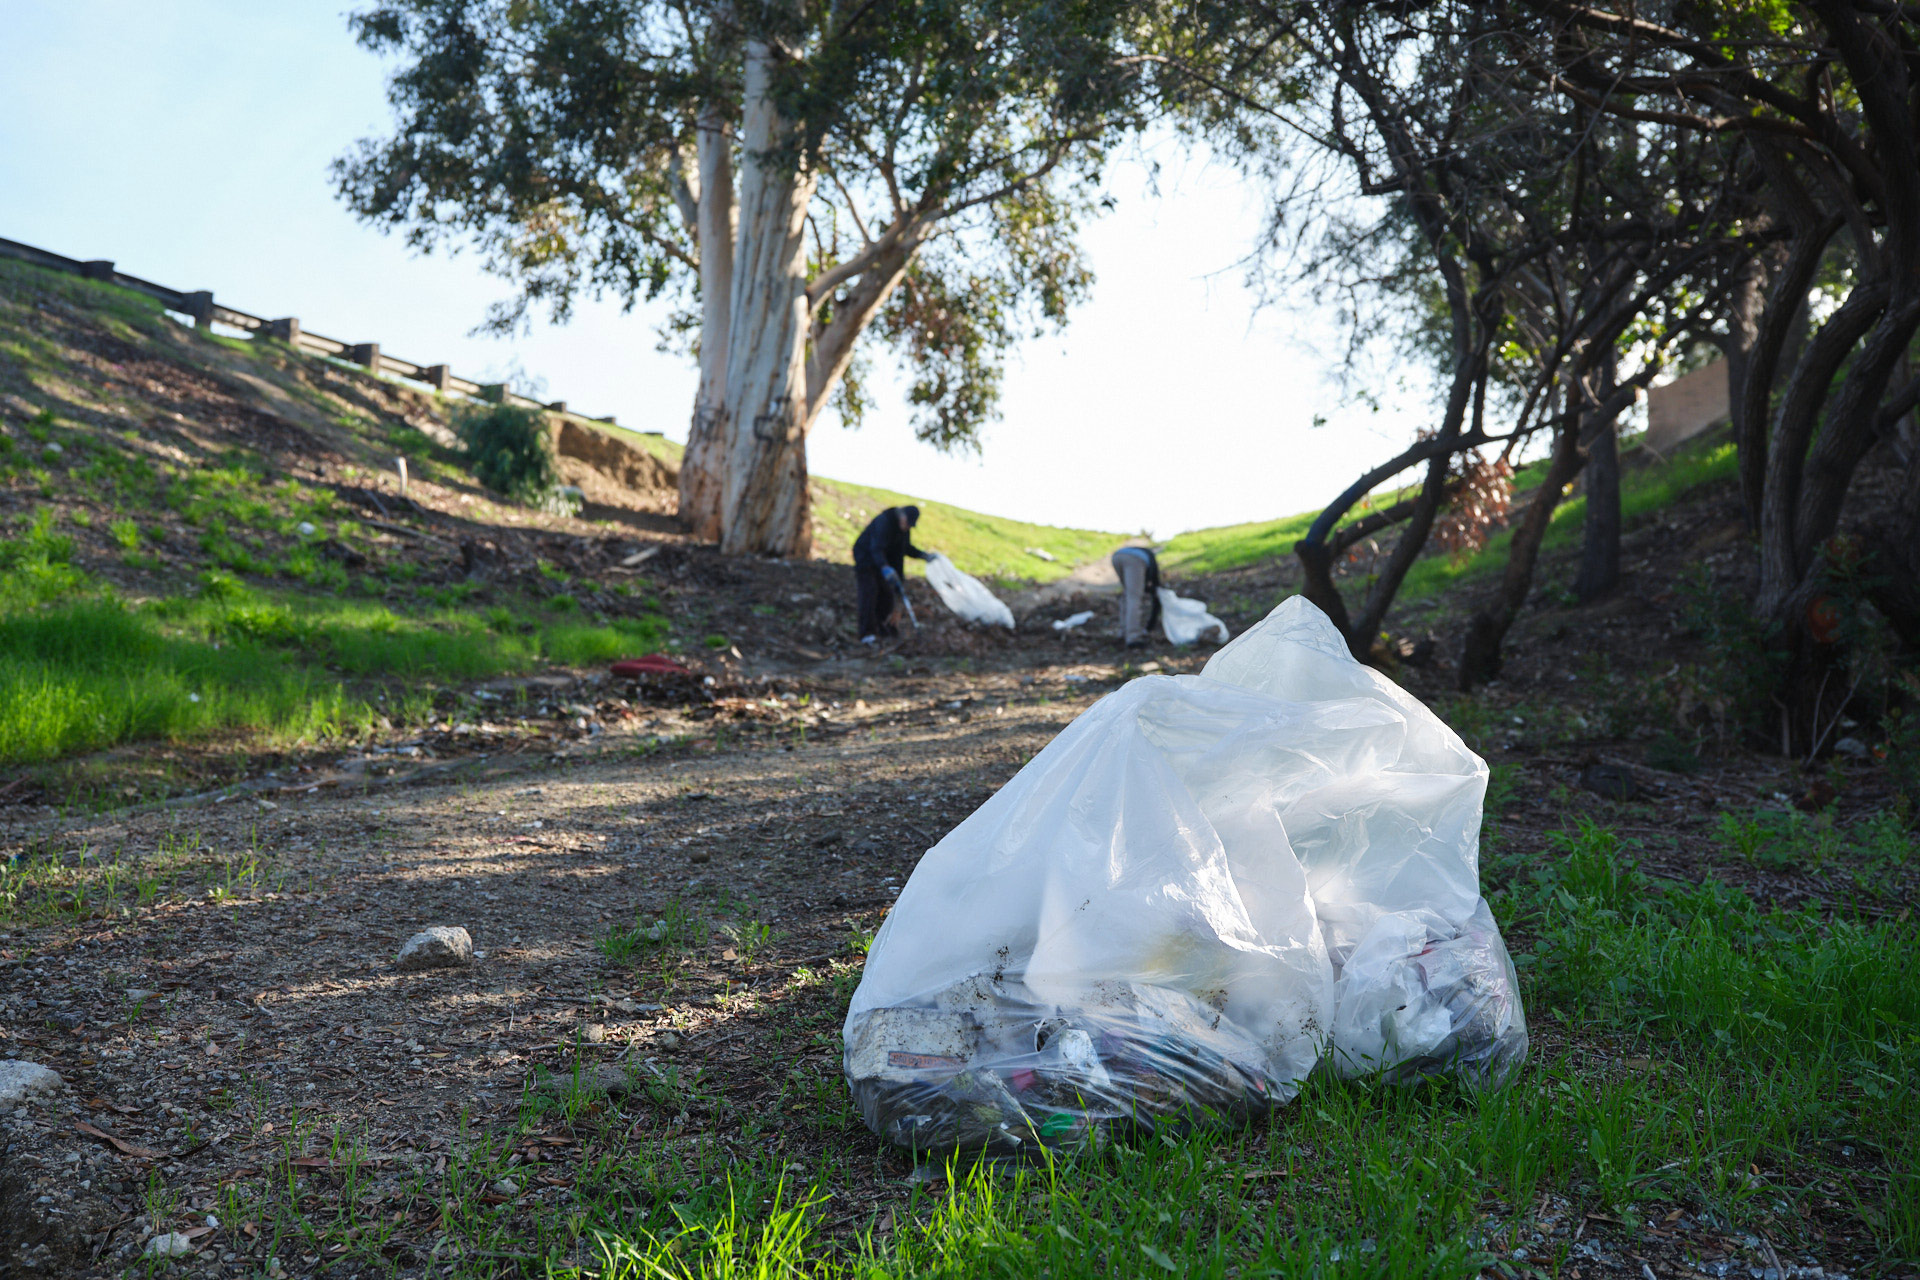 west-toluca-lake-community-cleanup-8